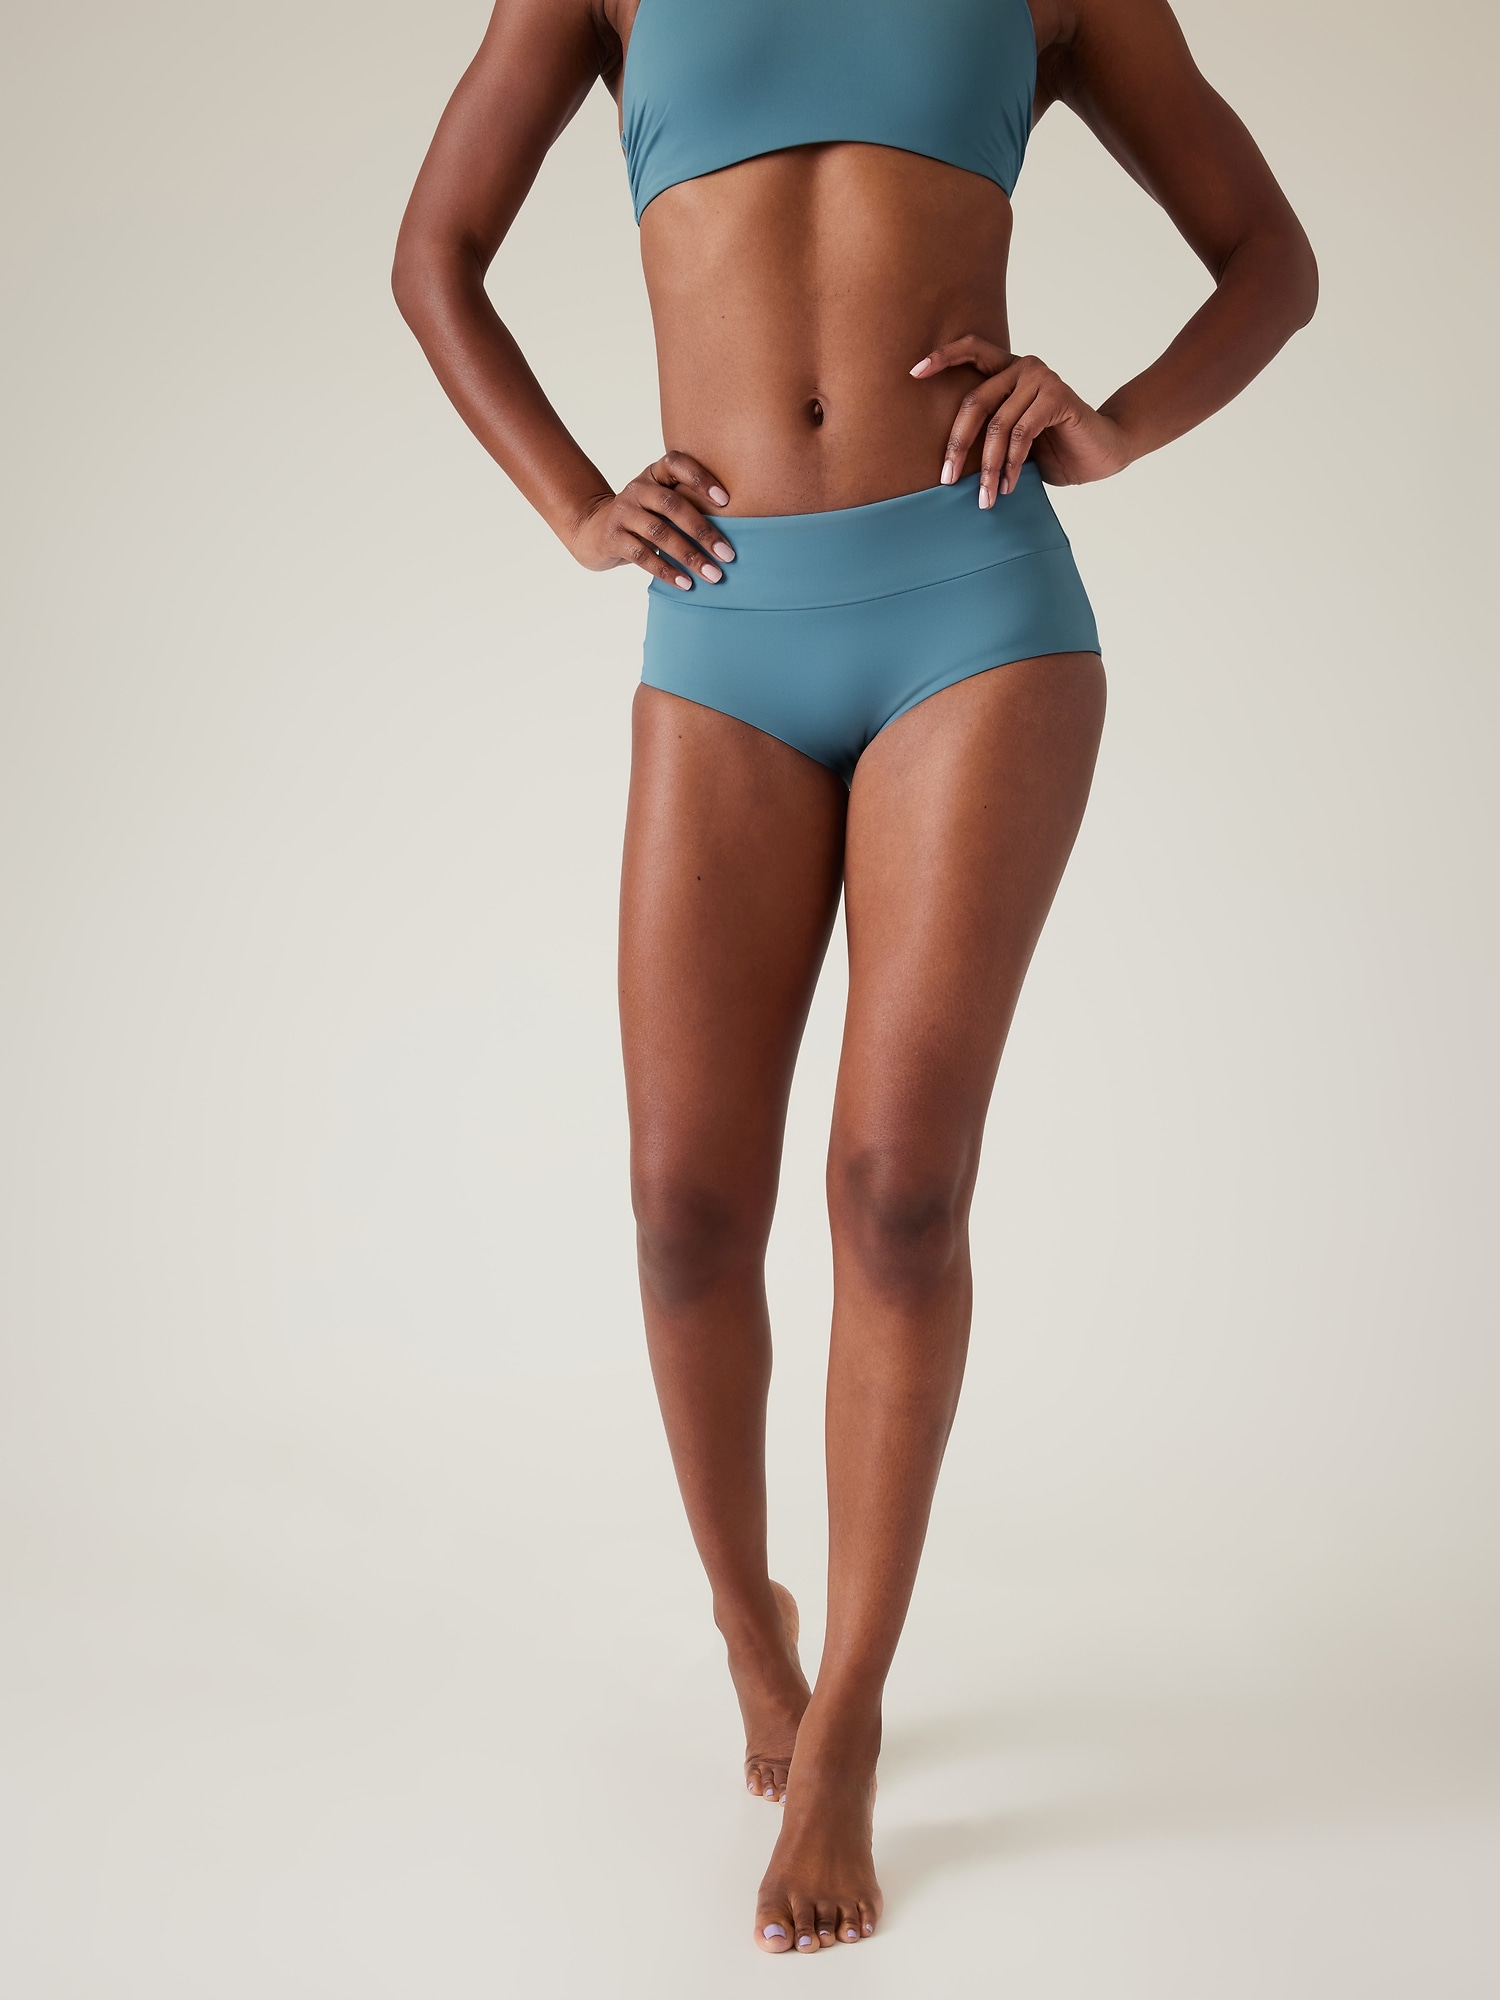 Are Boyshort Swim Bottoms Right for You?